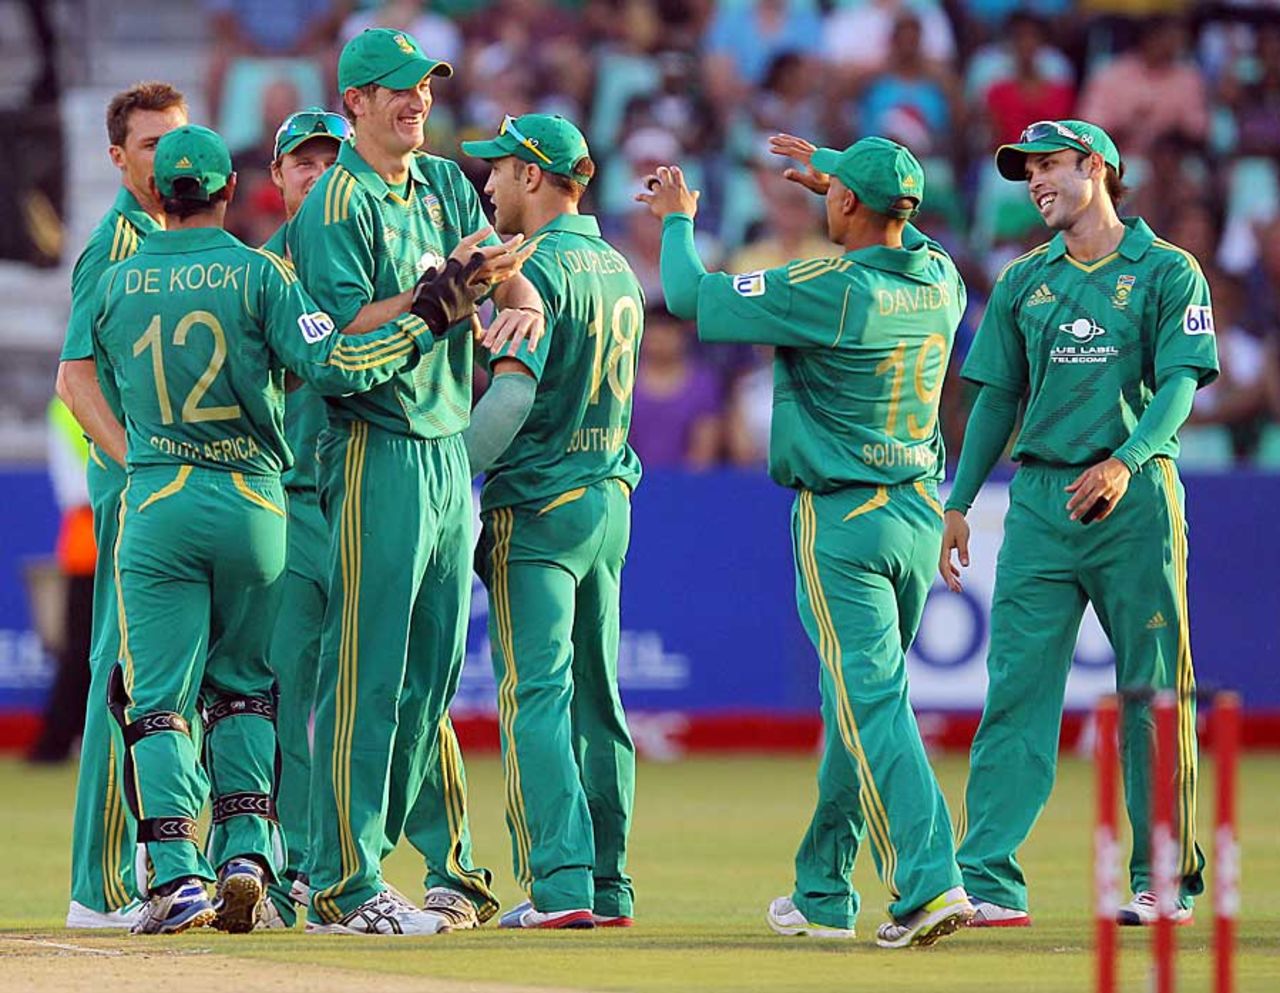 The South Africans kept chipping away at New Zealand, South Africa v New Zealand, 1st Twenty20 international, Durban, December 21, 2012